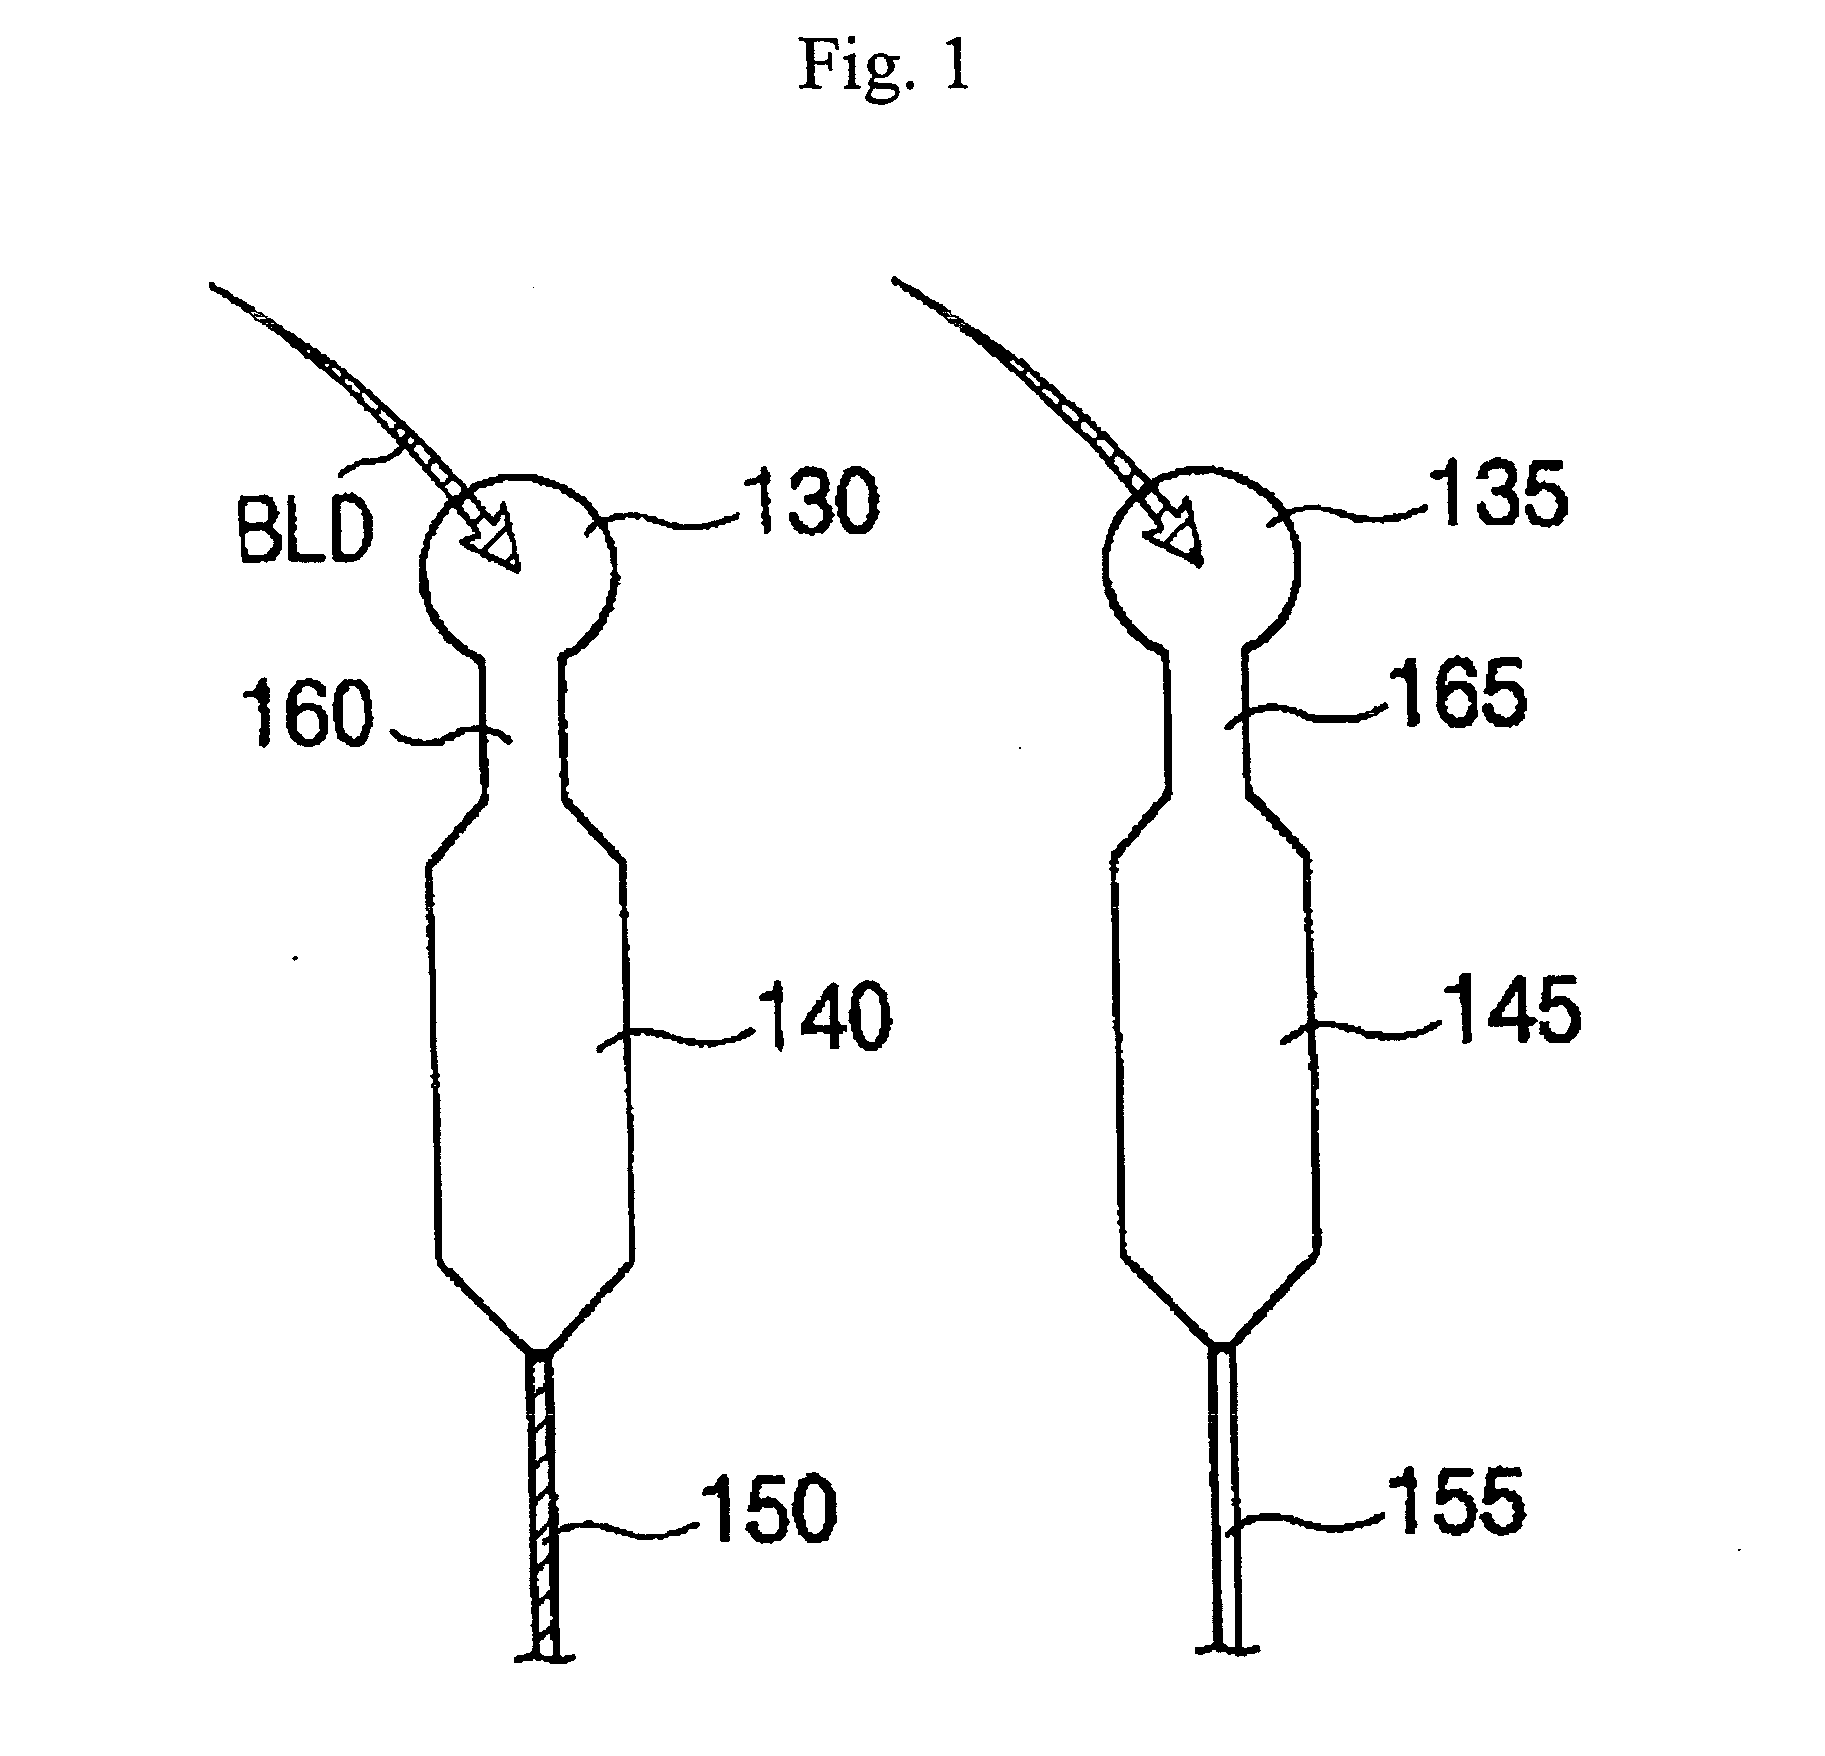 Method of examining blood type and apparatus for examining blood type using the method